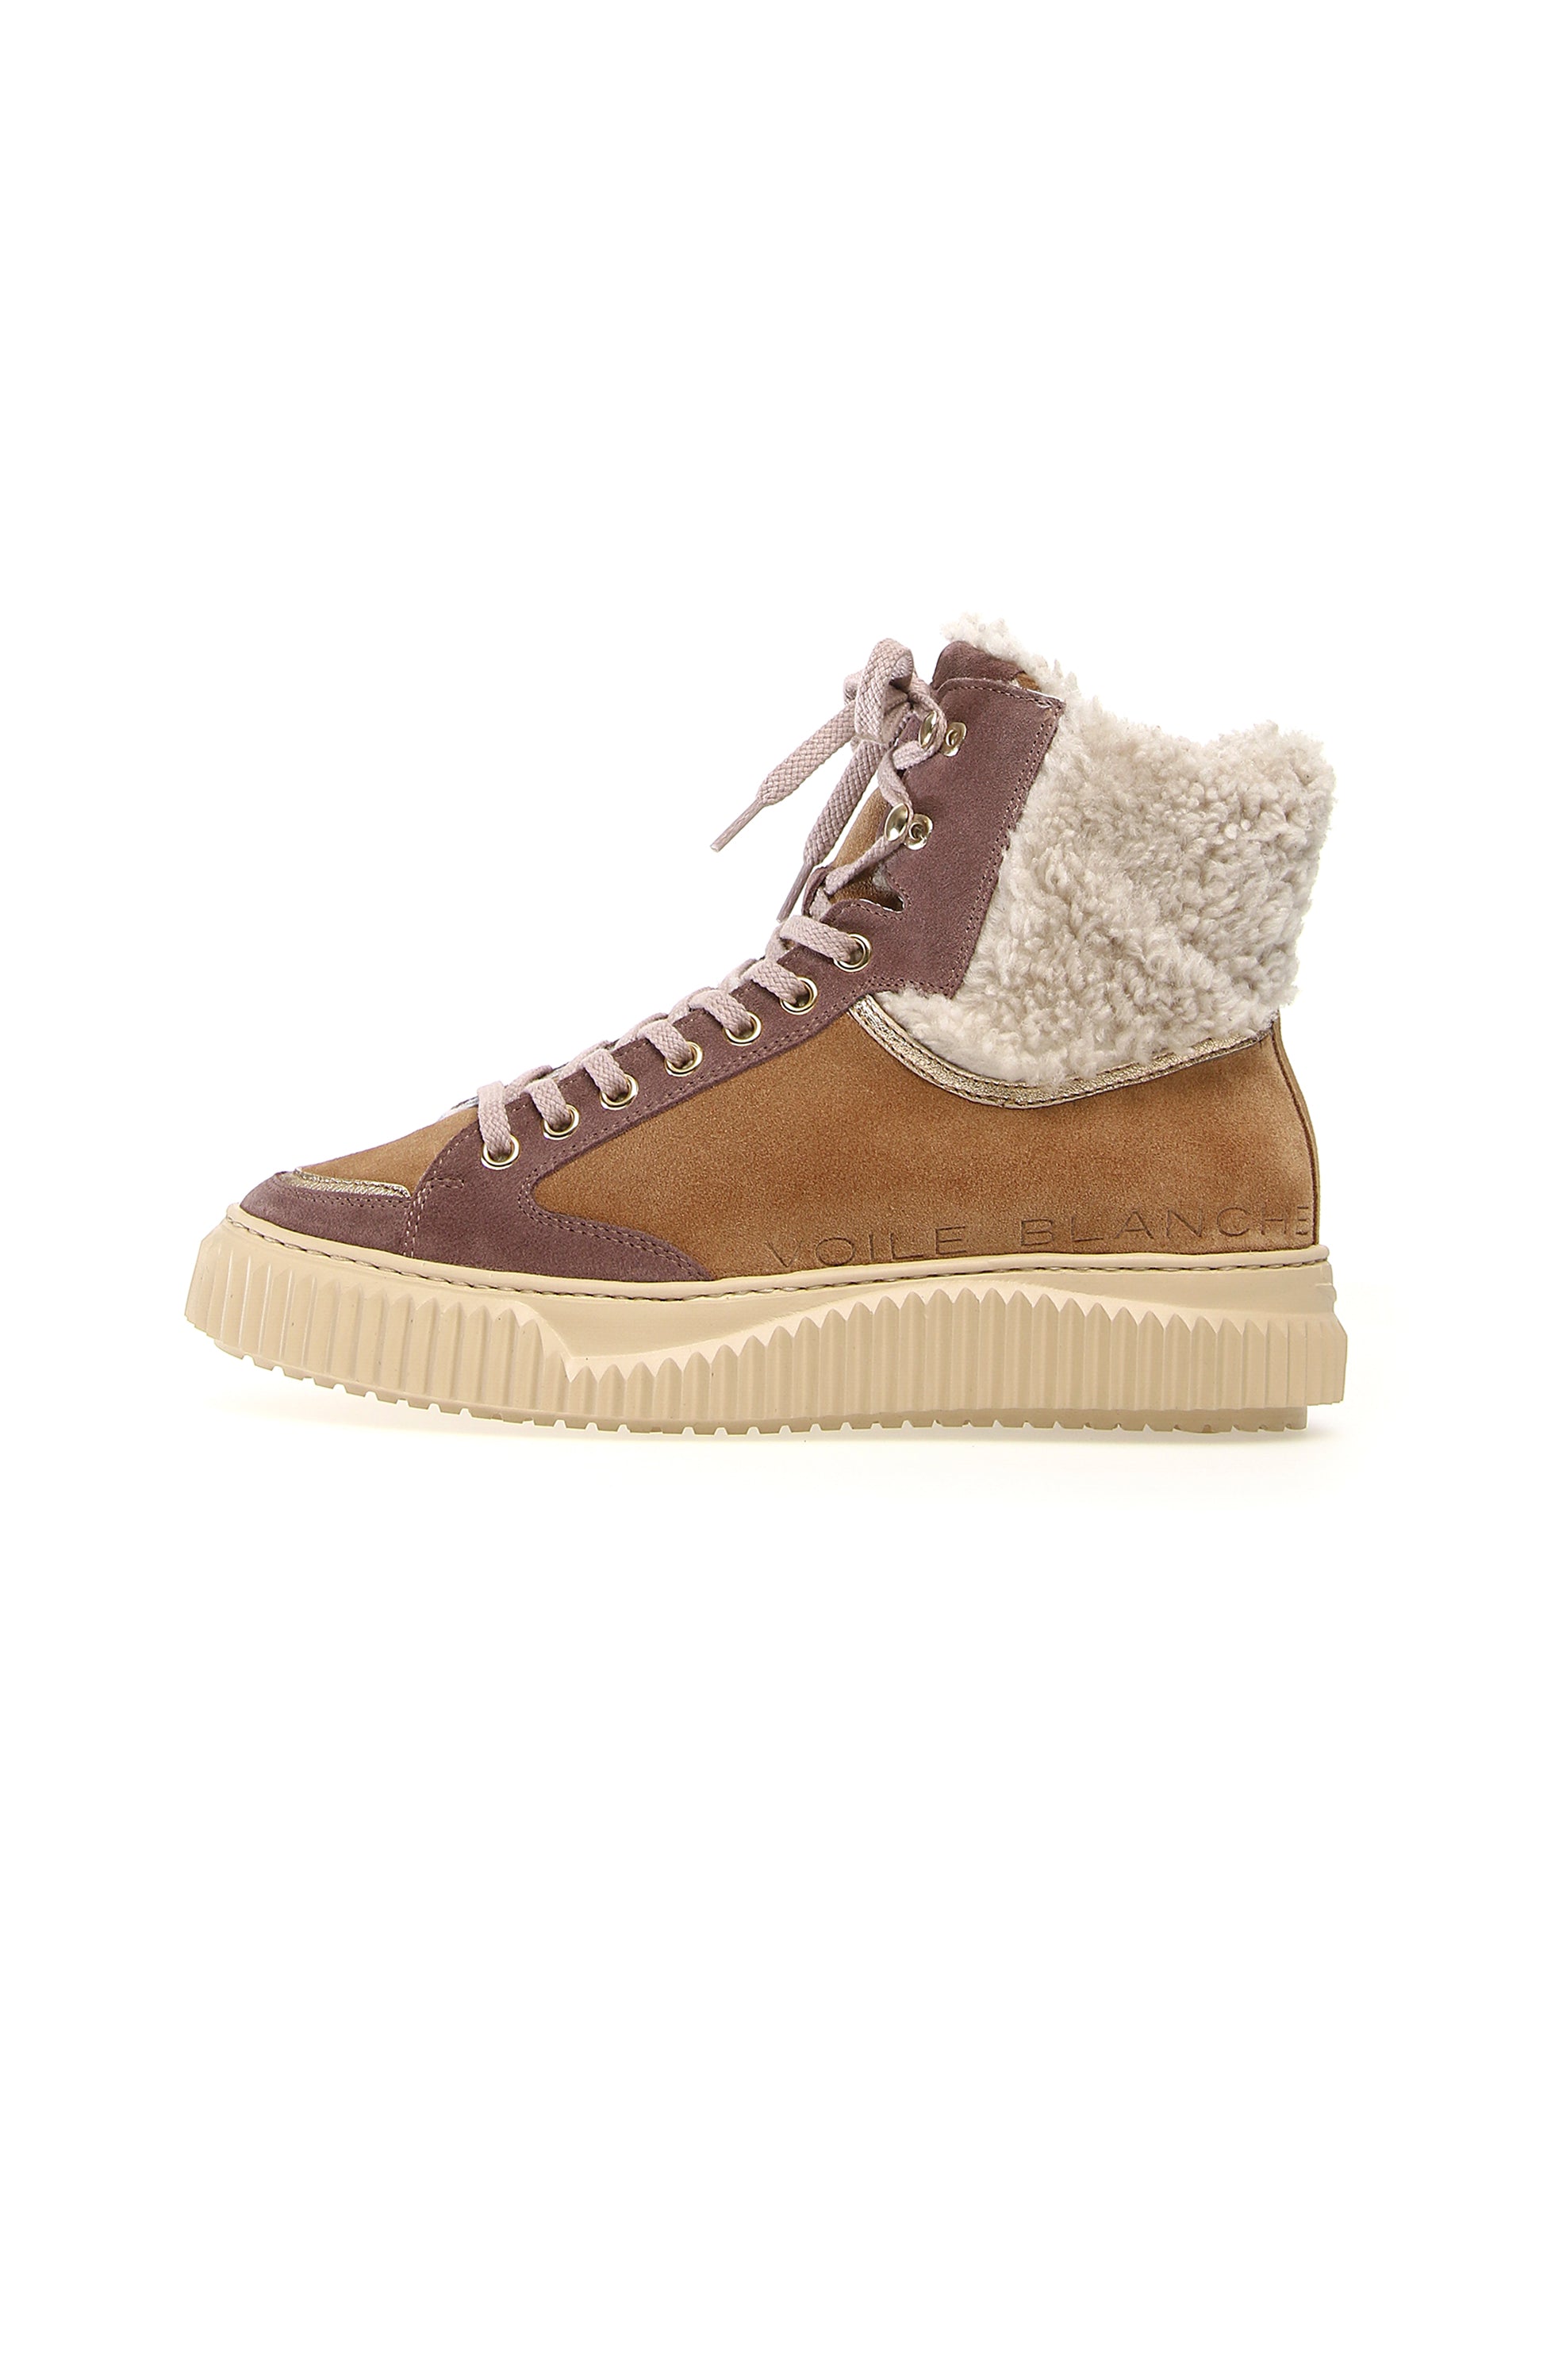 Fur suede high sneakers VOILE BLANCHE